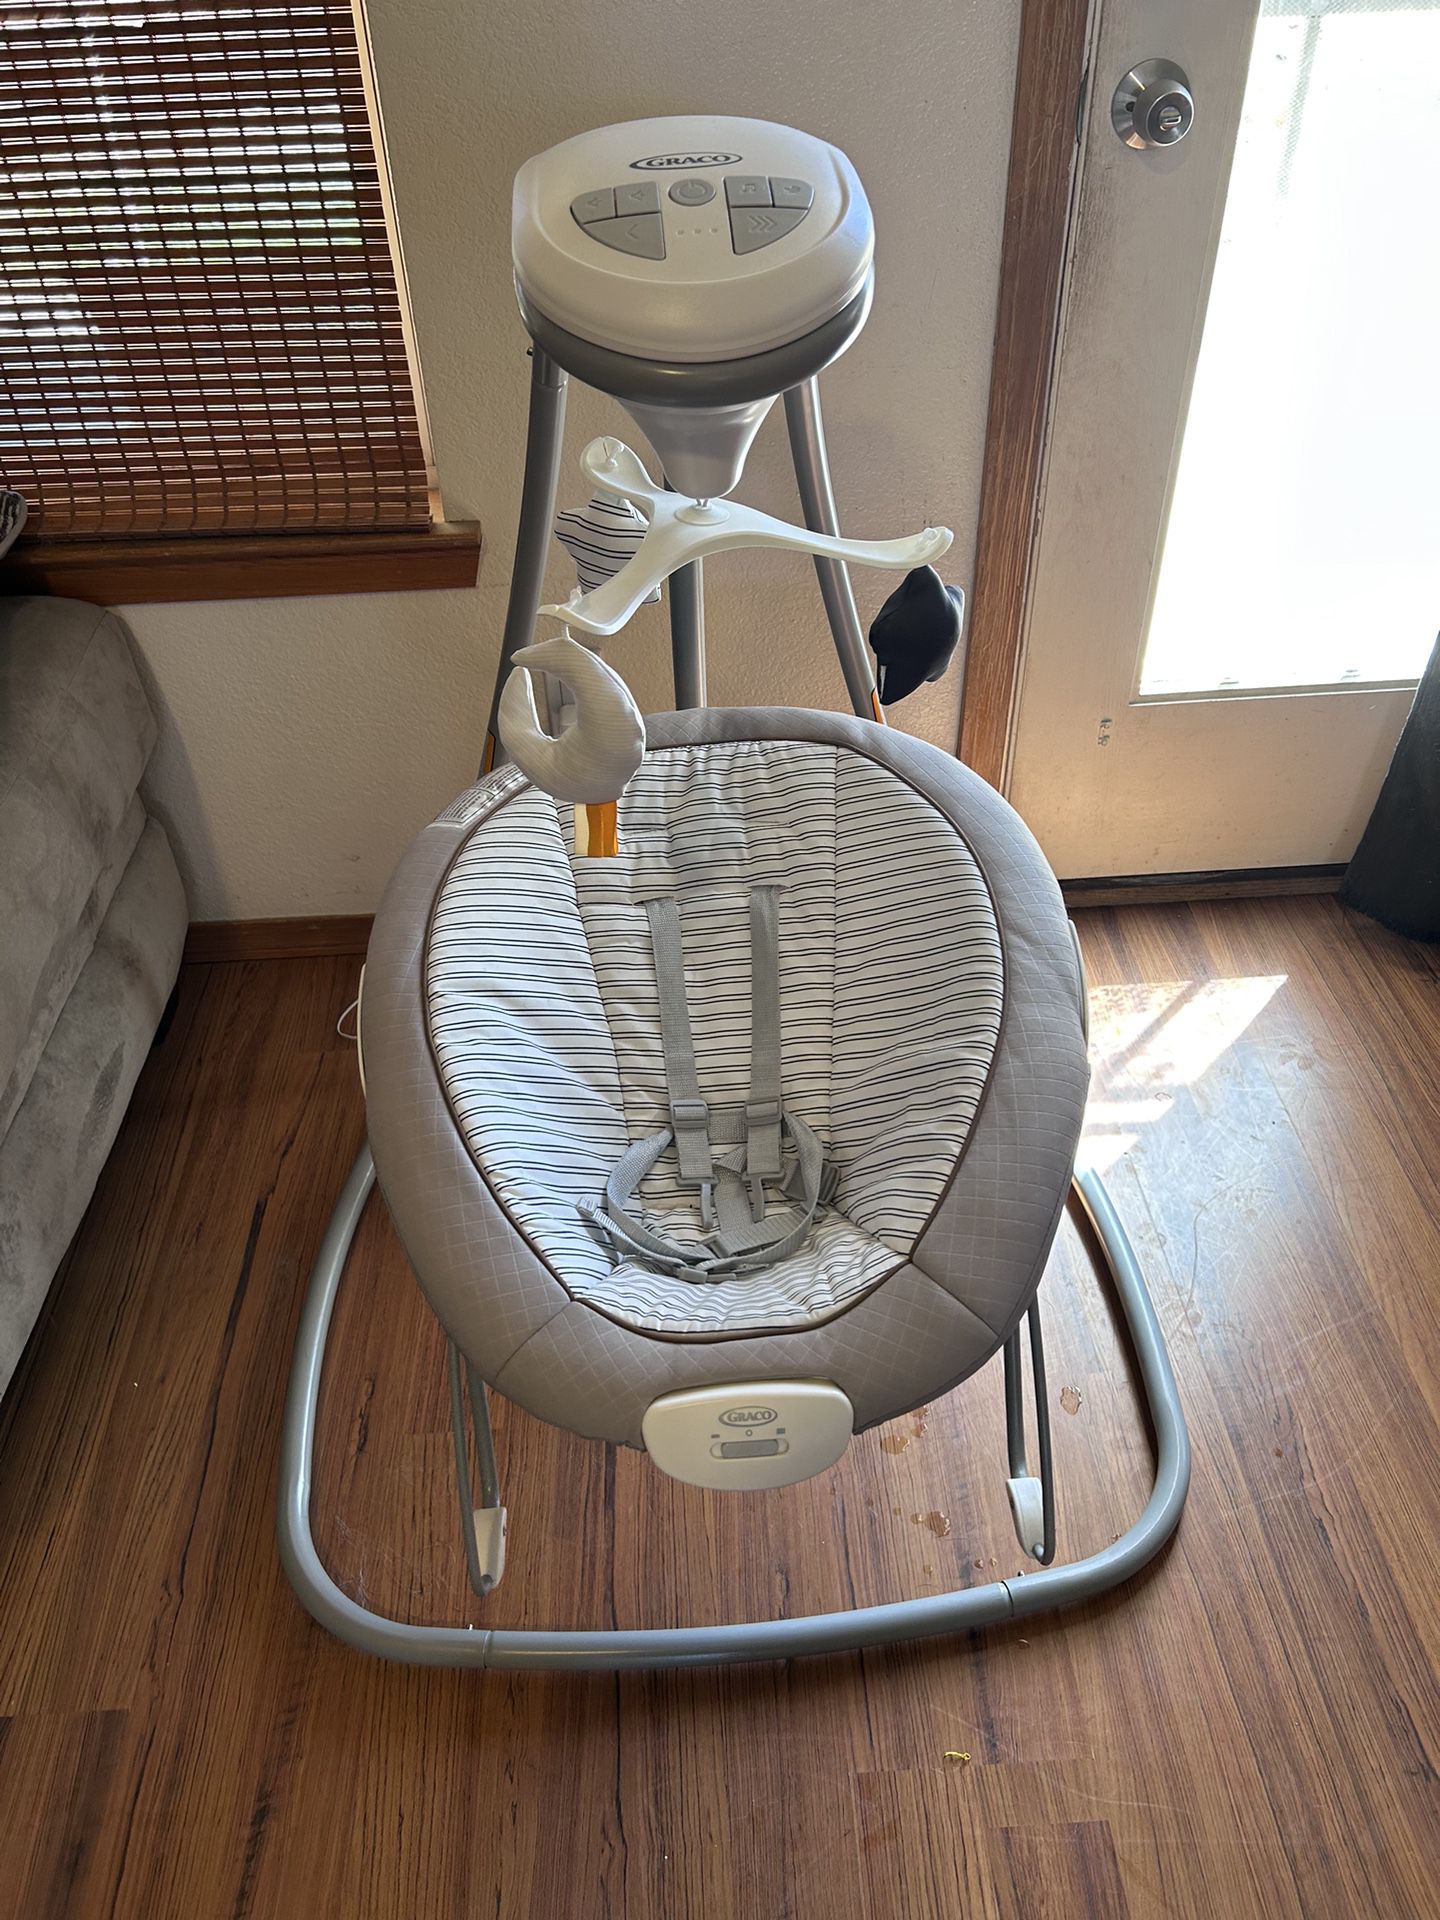 Graco Baby Swing Bouncer Combo Ingenuity Bassinet Each Or Both For For Sale In